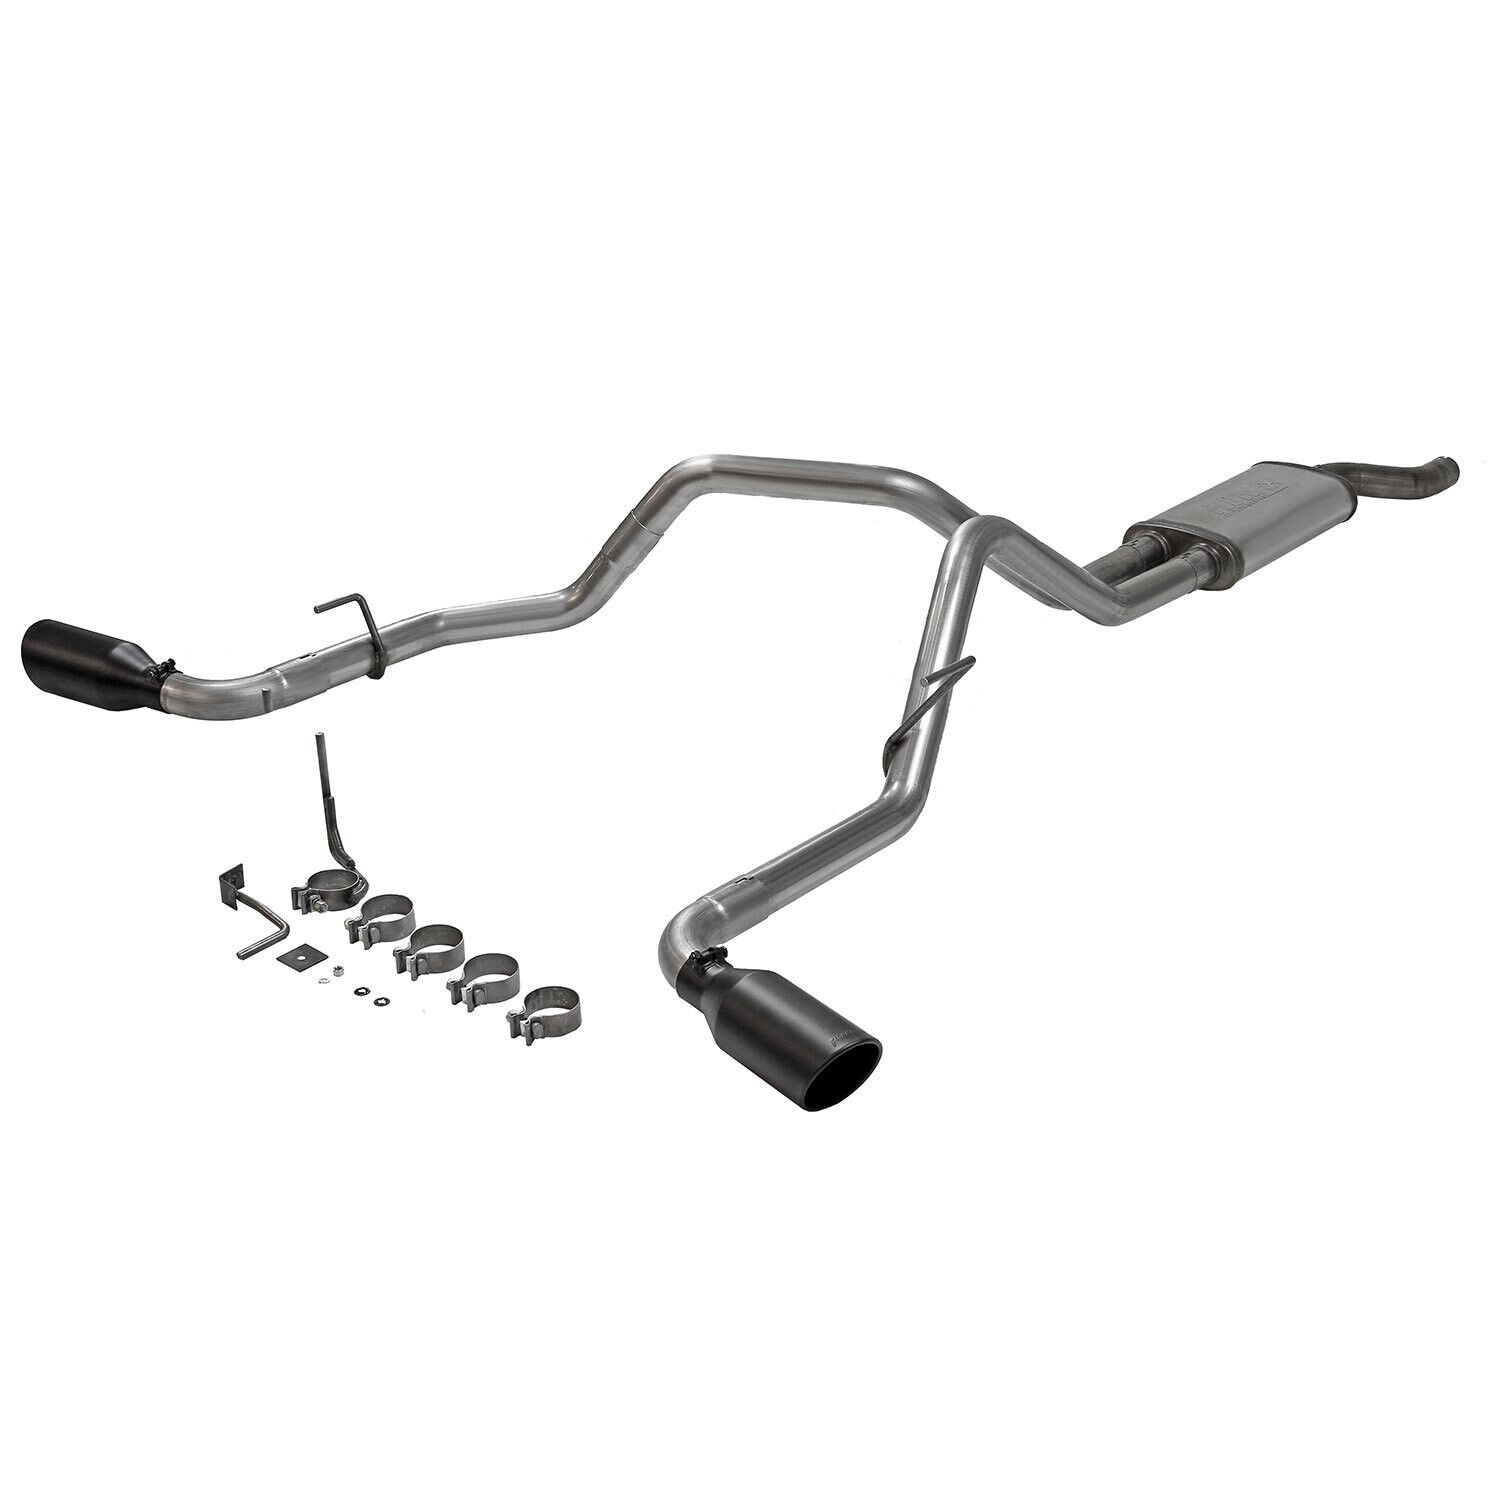 Flowmaster 718103 FlowFX  Exhaust System Fits 2005-19 Nissan Frontier